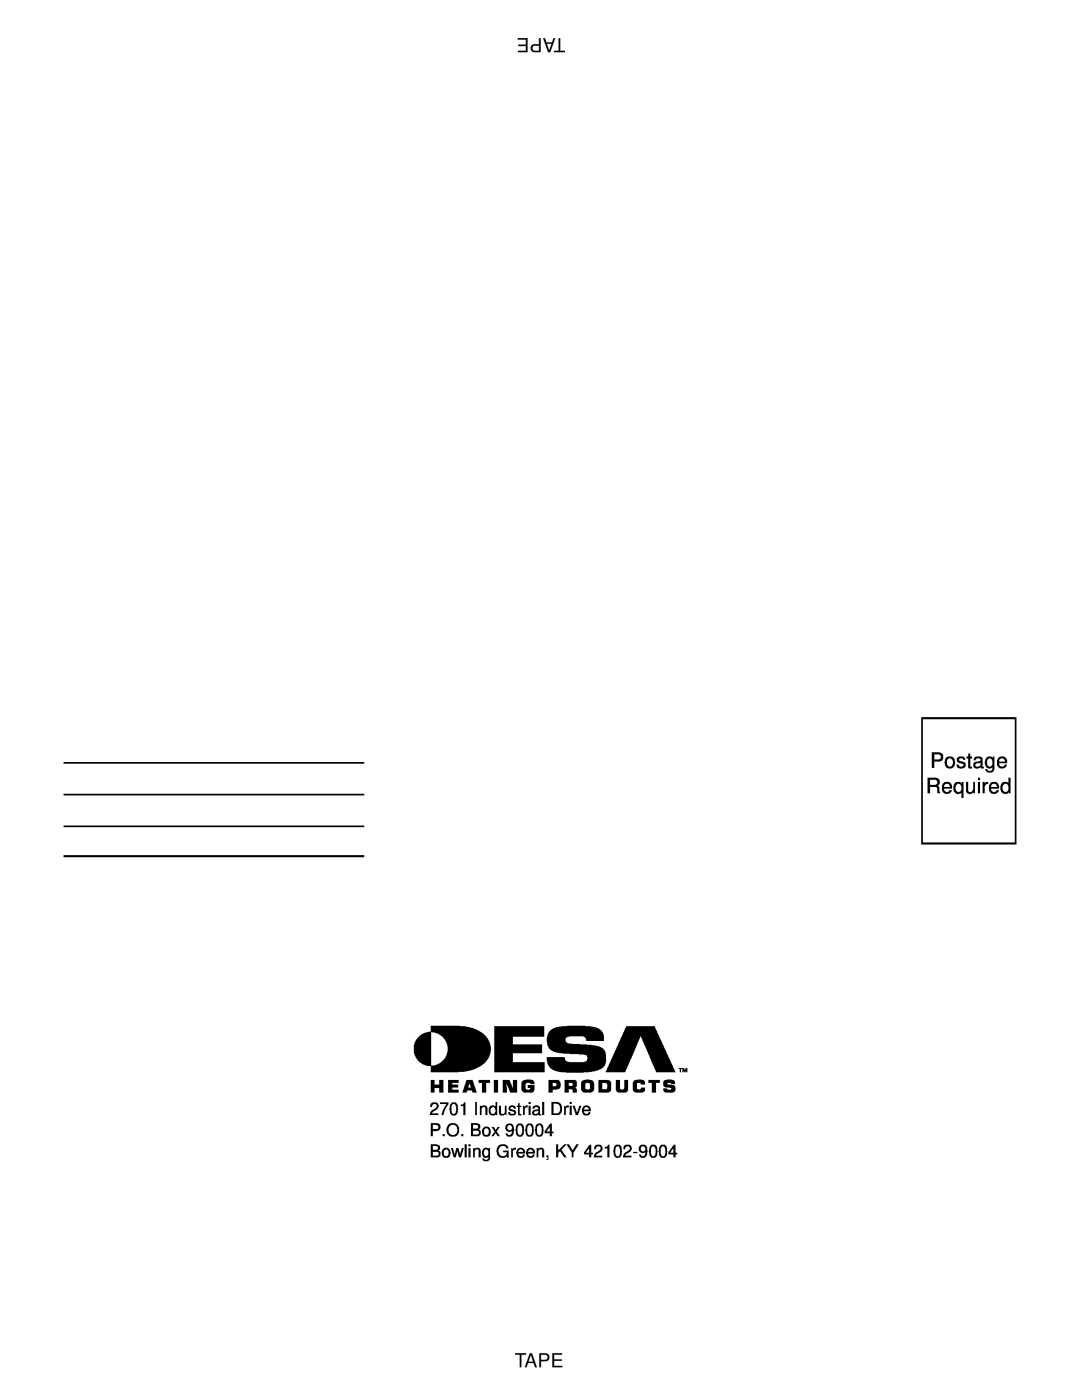 Desa REM10PT RH10PT installation manual Postage Required, Tape, Industrial Drive P.O. Box Bowling Green, KY 